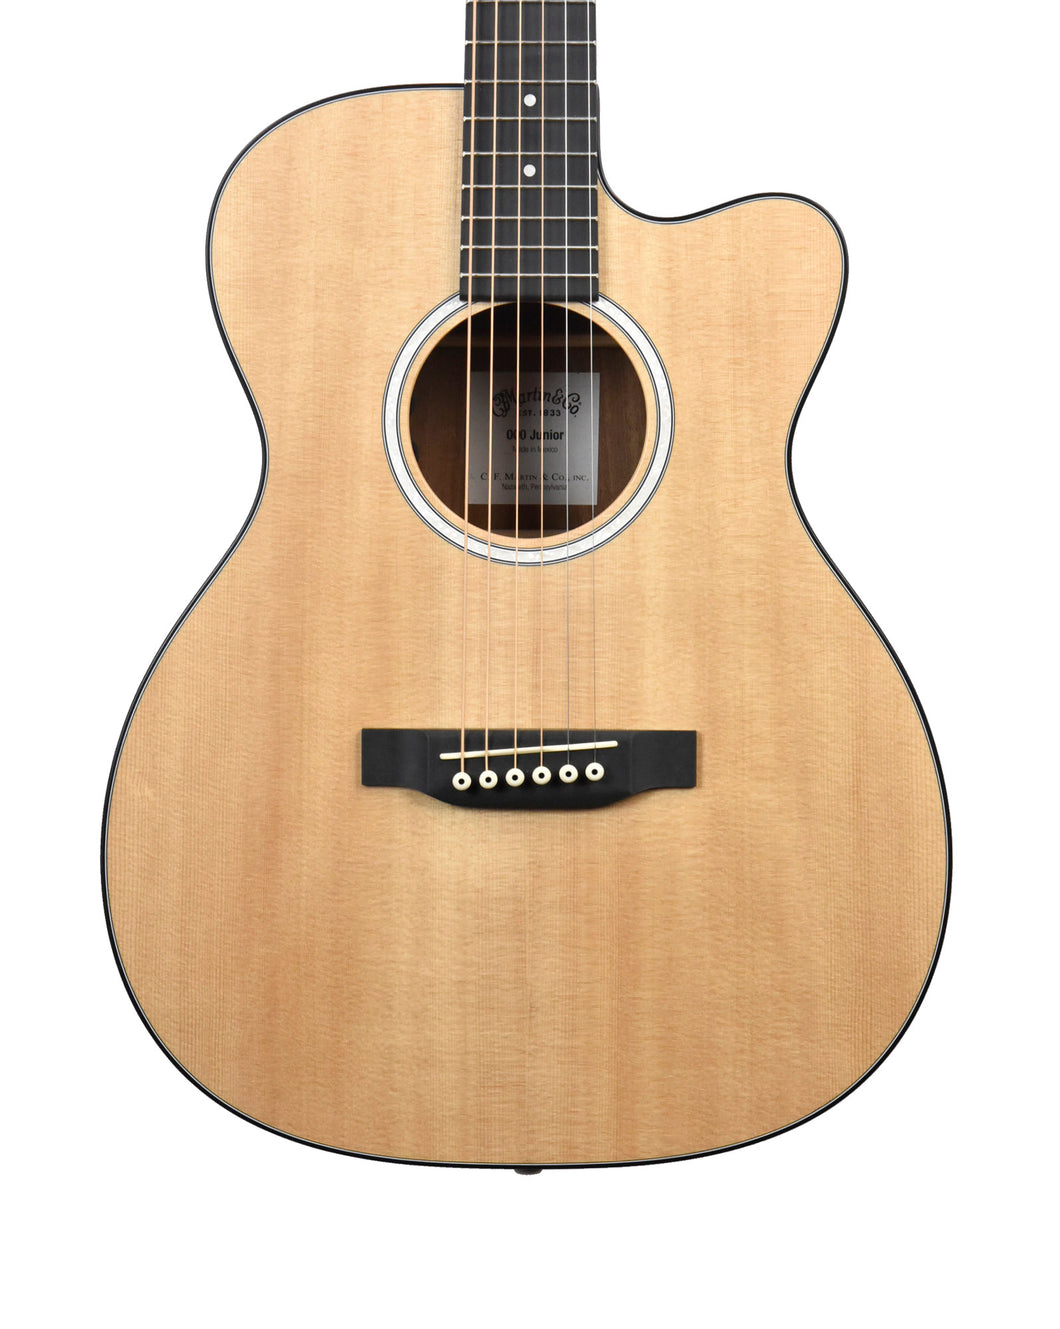 Used 2019 Martin 000CJr-10E Acoustic-Electric Guitar in Natural 2303310 - The Music Gallery